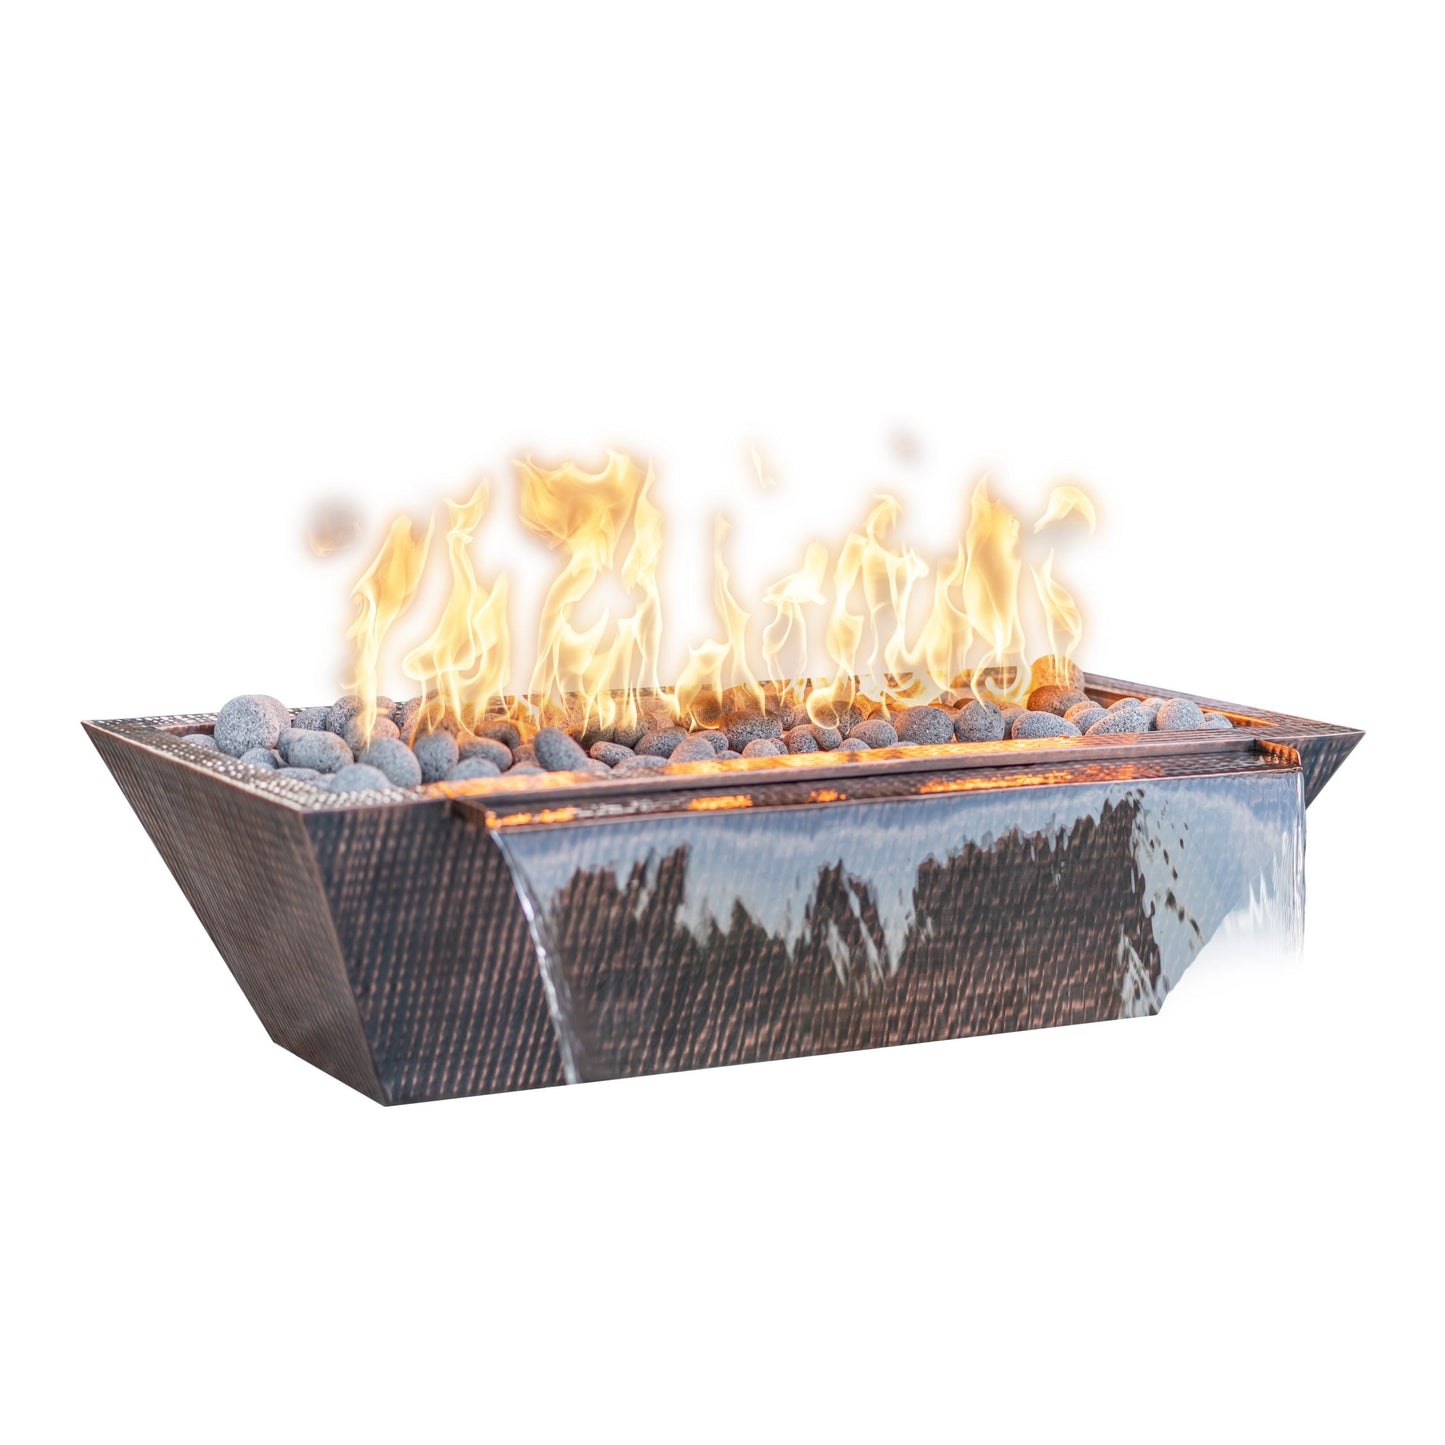 The Outdoor Plus Linear Maya 48" Hammered Copper Natural Gas Fire & Water Bowl with Match Lit with Flame Sense Ignition